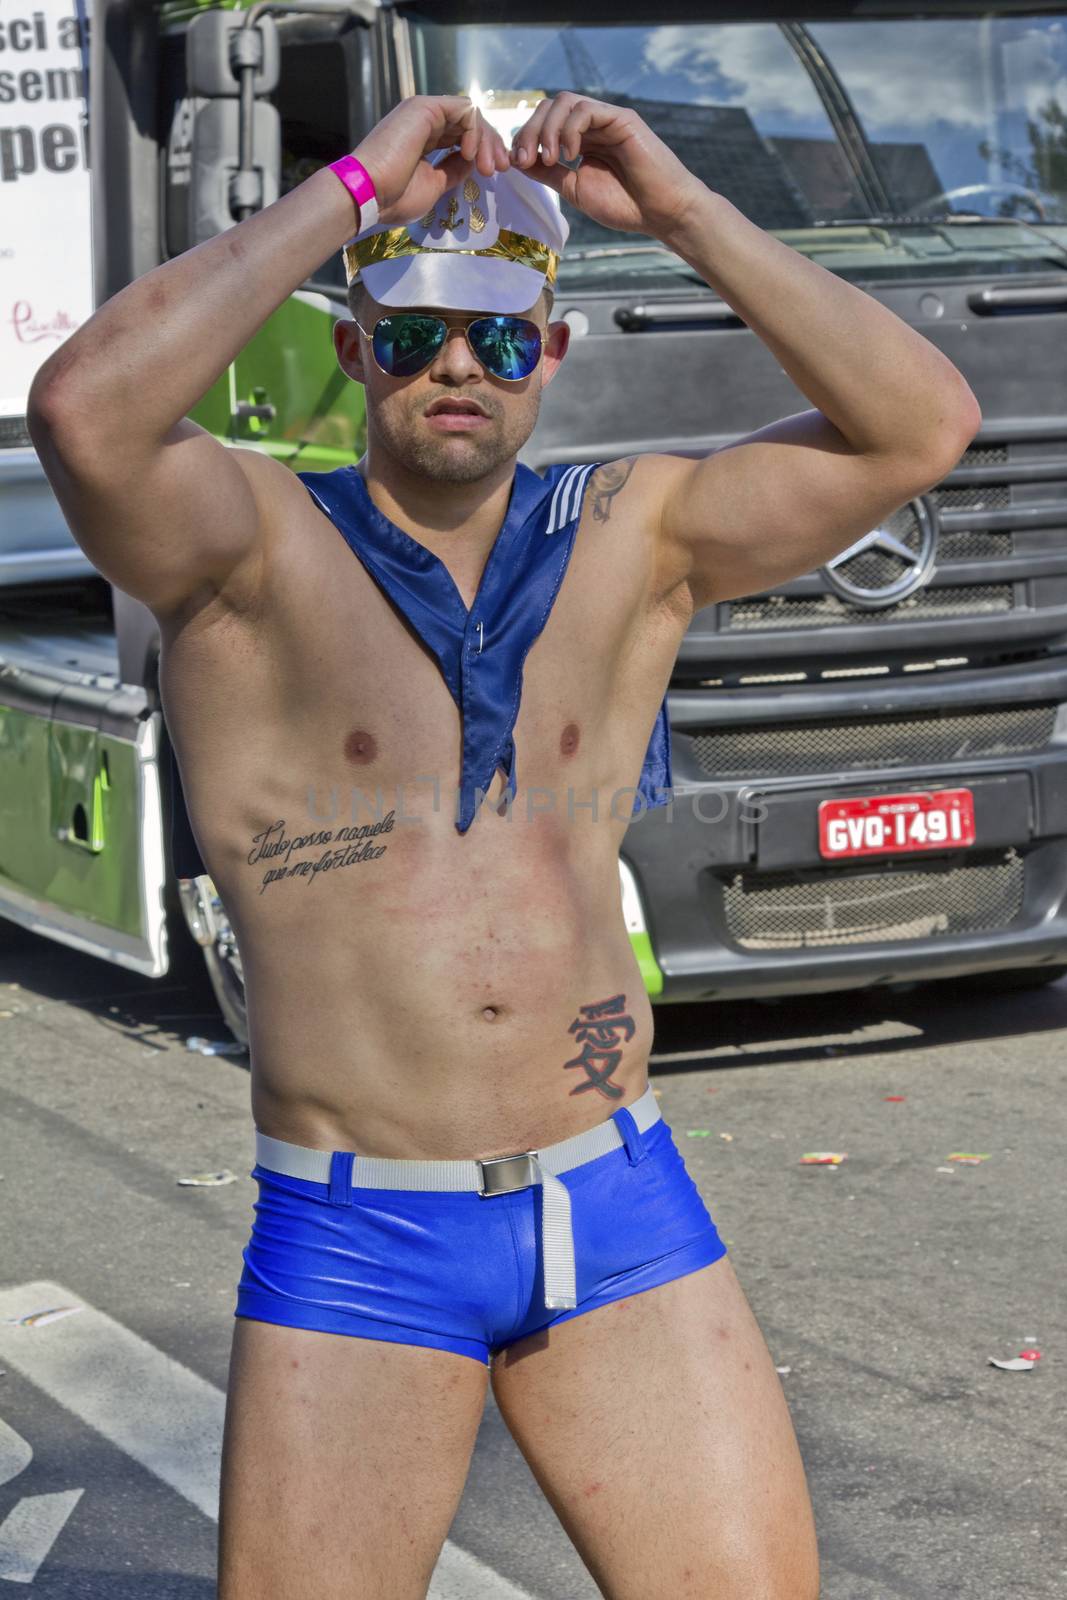 One person wearing costume in Pride Parade Sao Paulo by marphotography